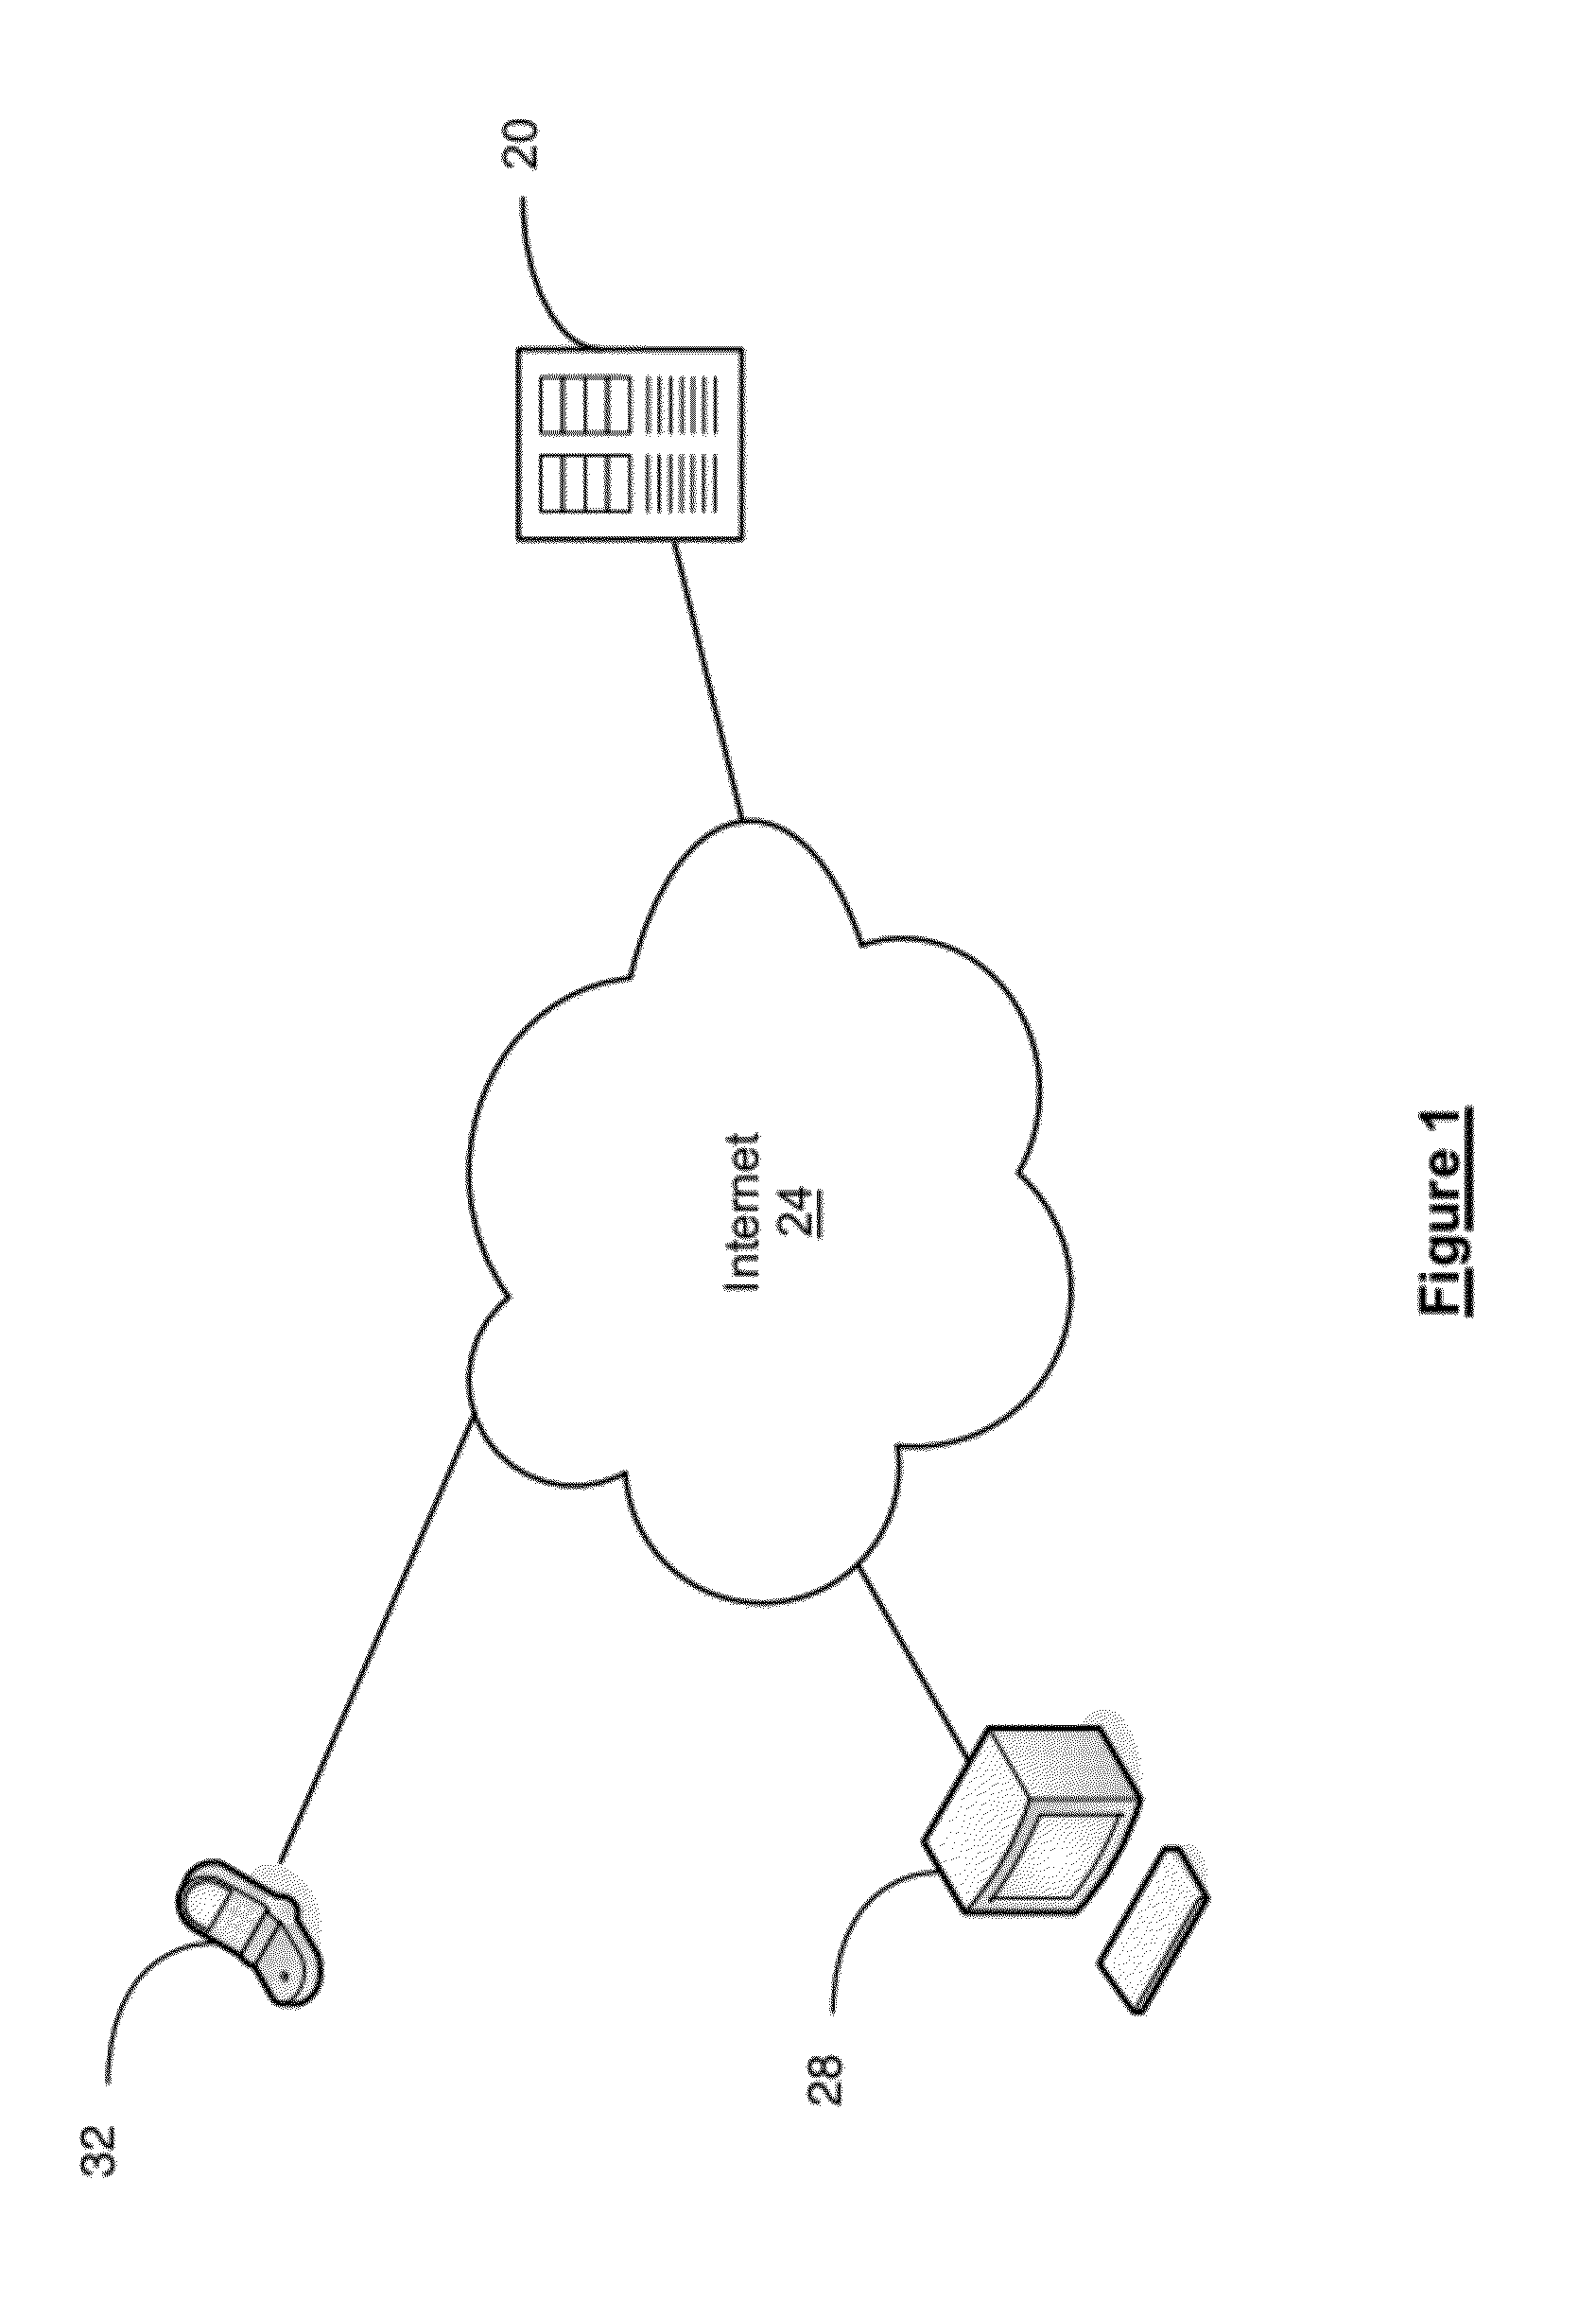 System and method for itinerary planning